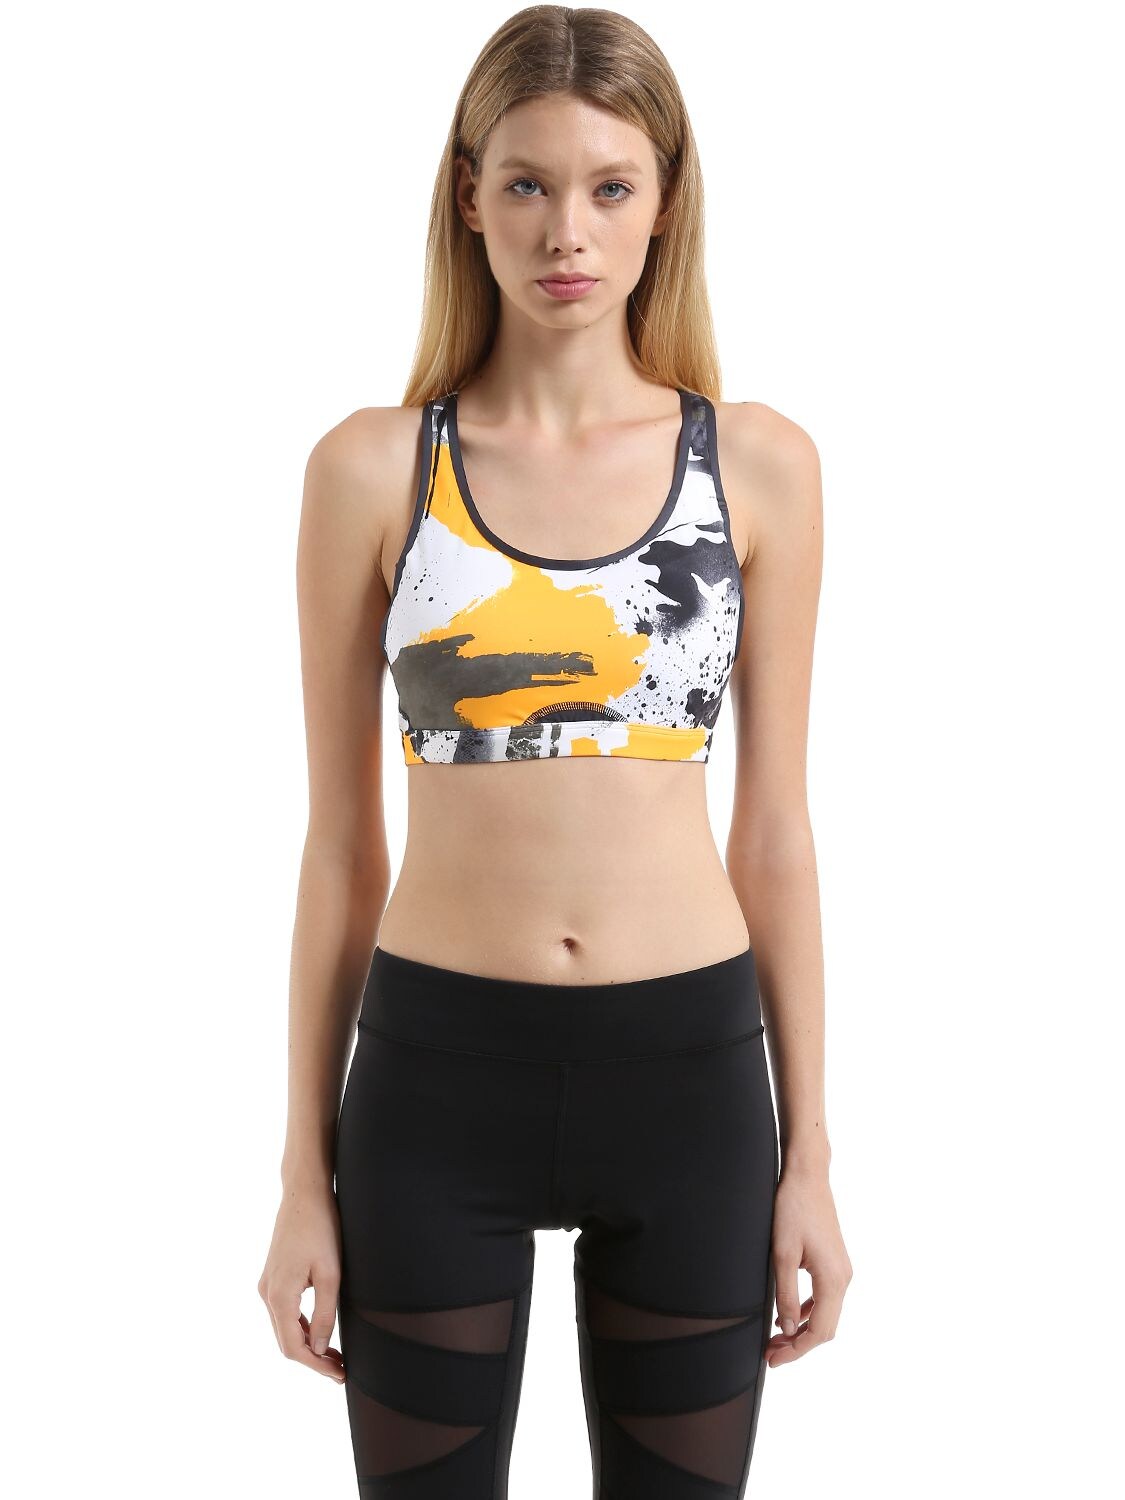 Image of High Support Sports Bra